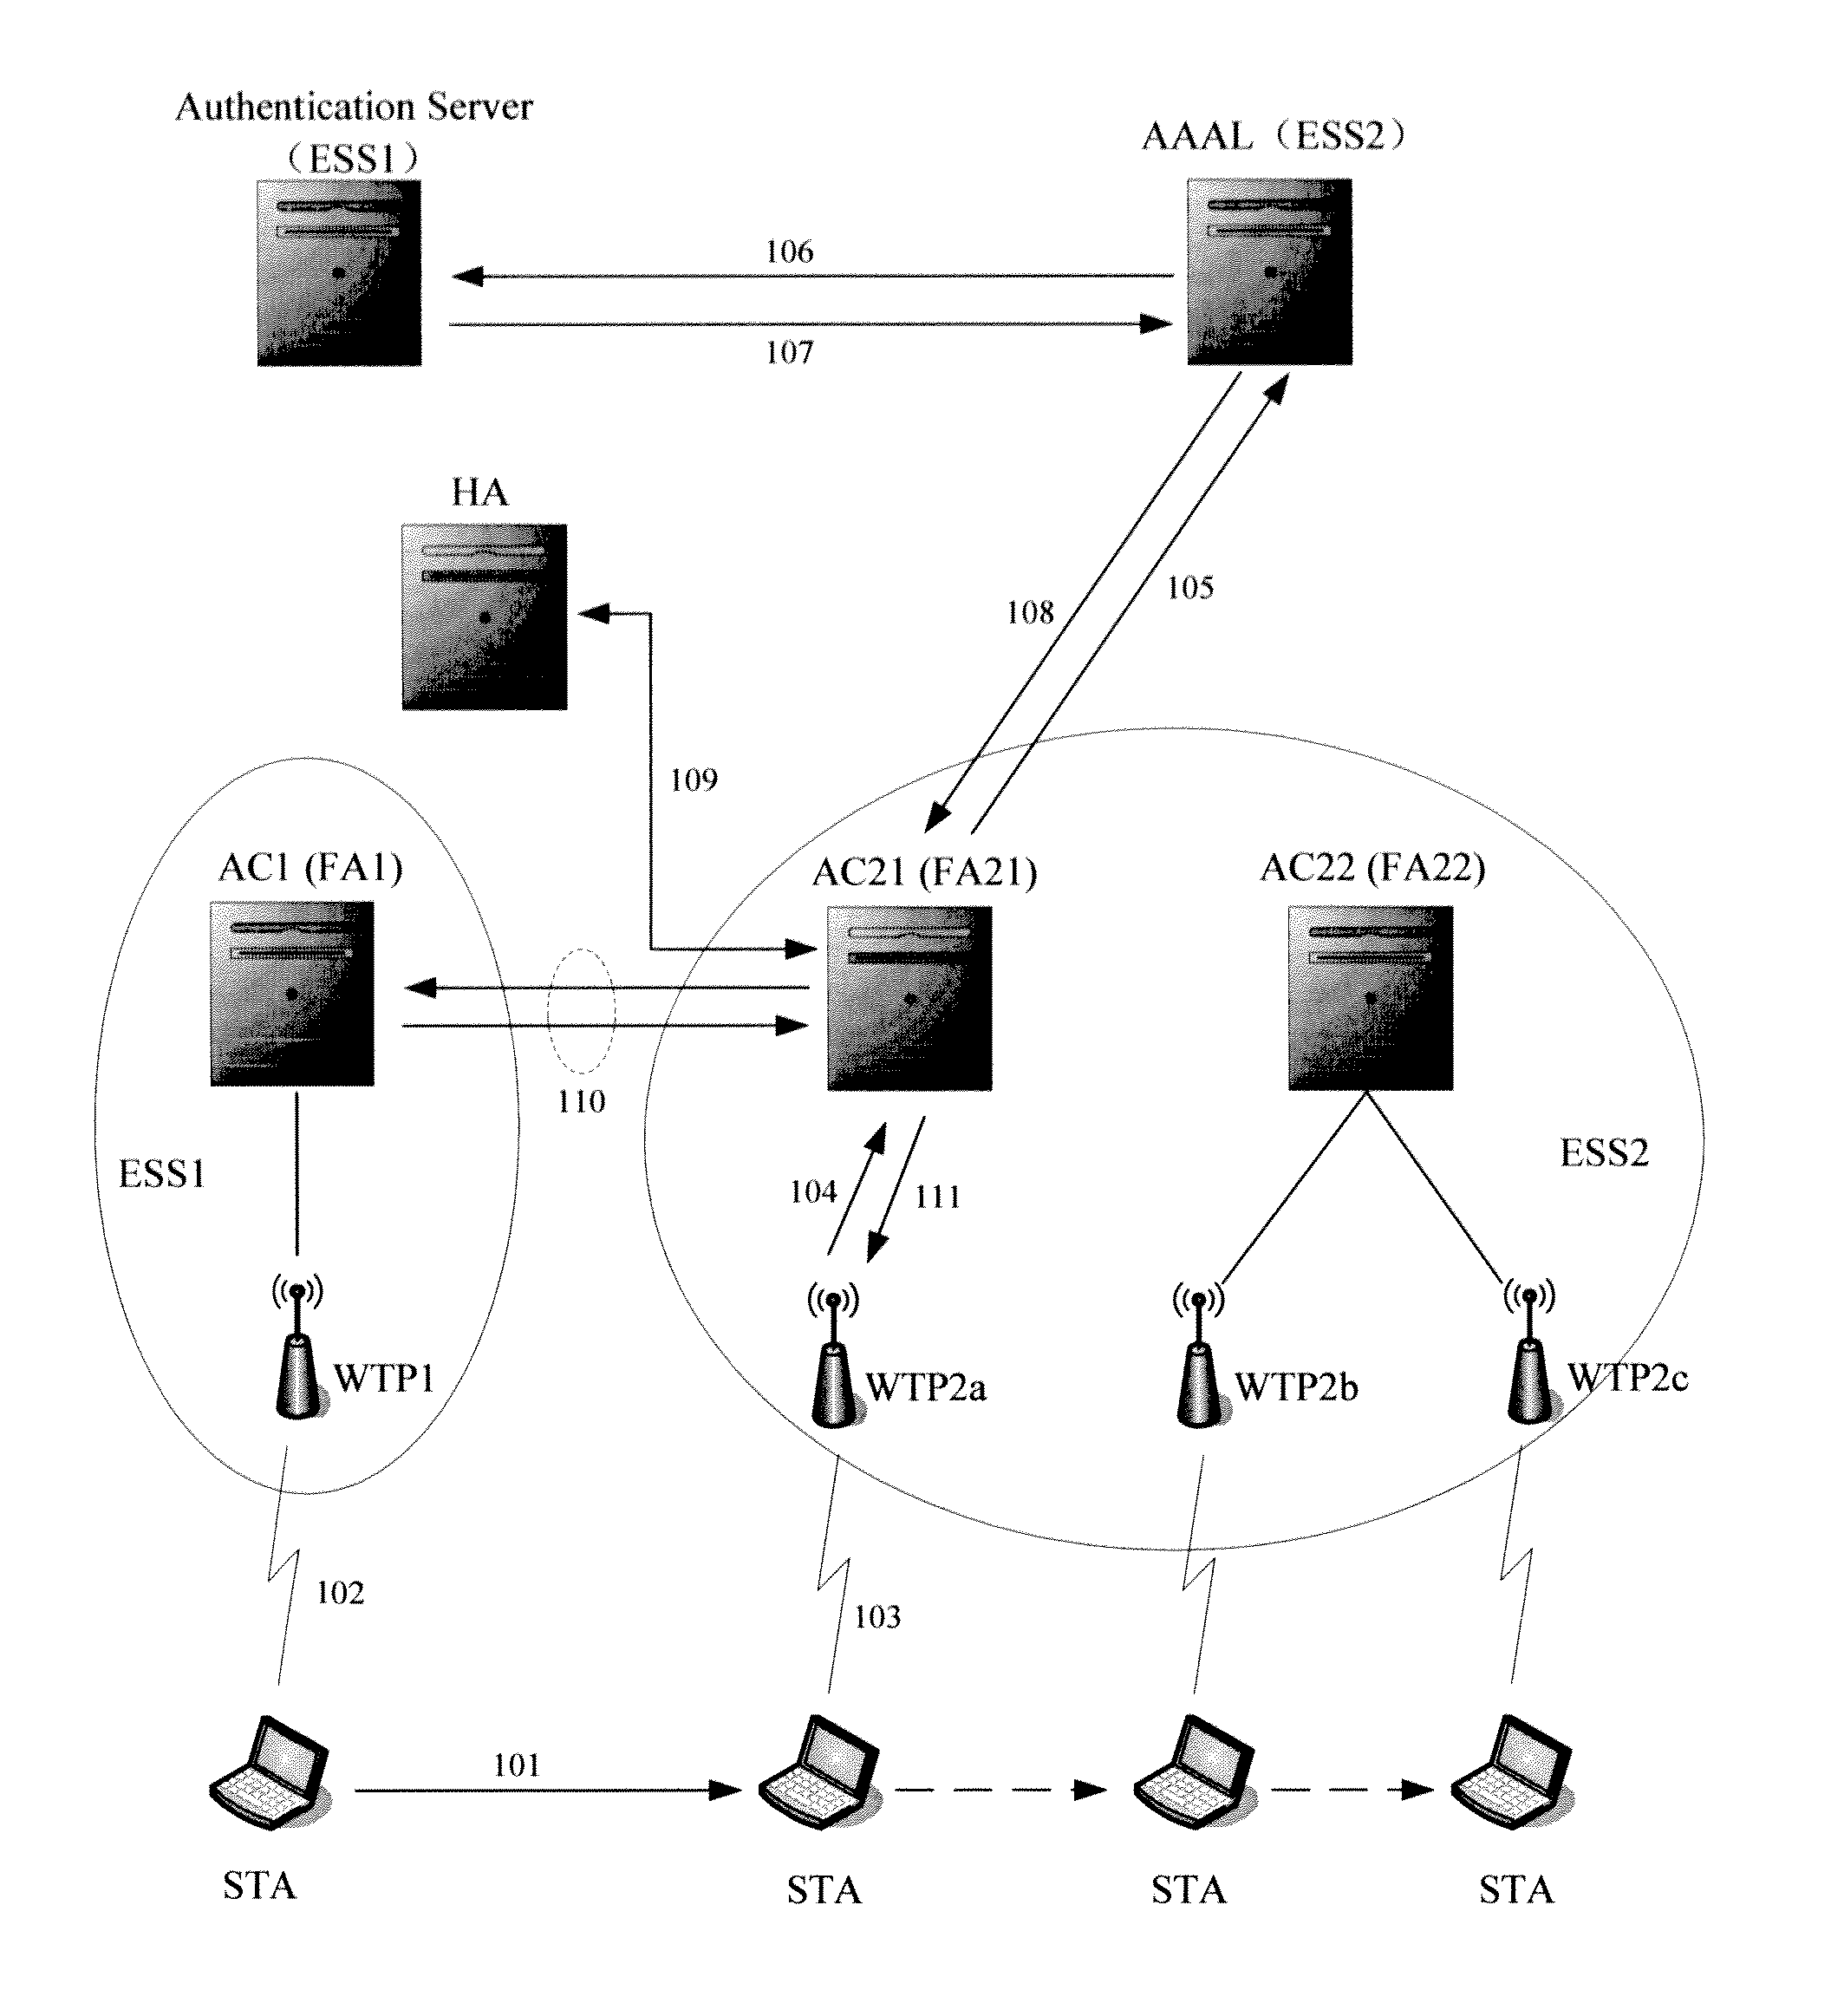 A roaming method for a mobile terminal in wlan, related access controller and access point device